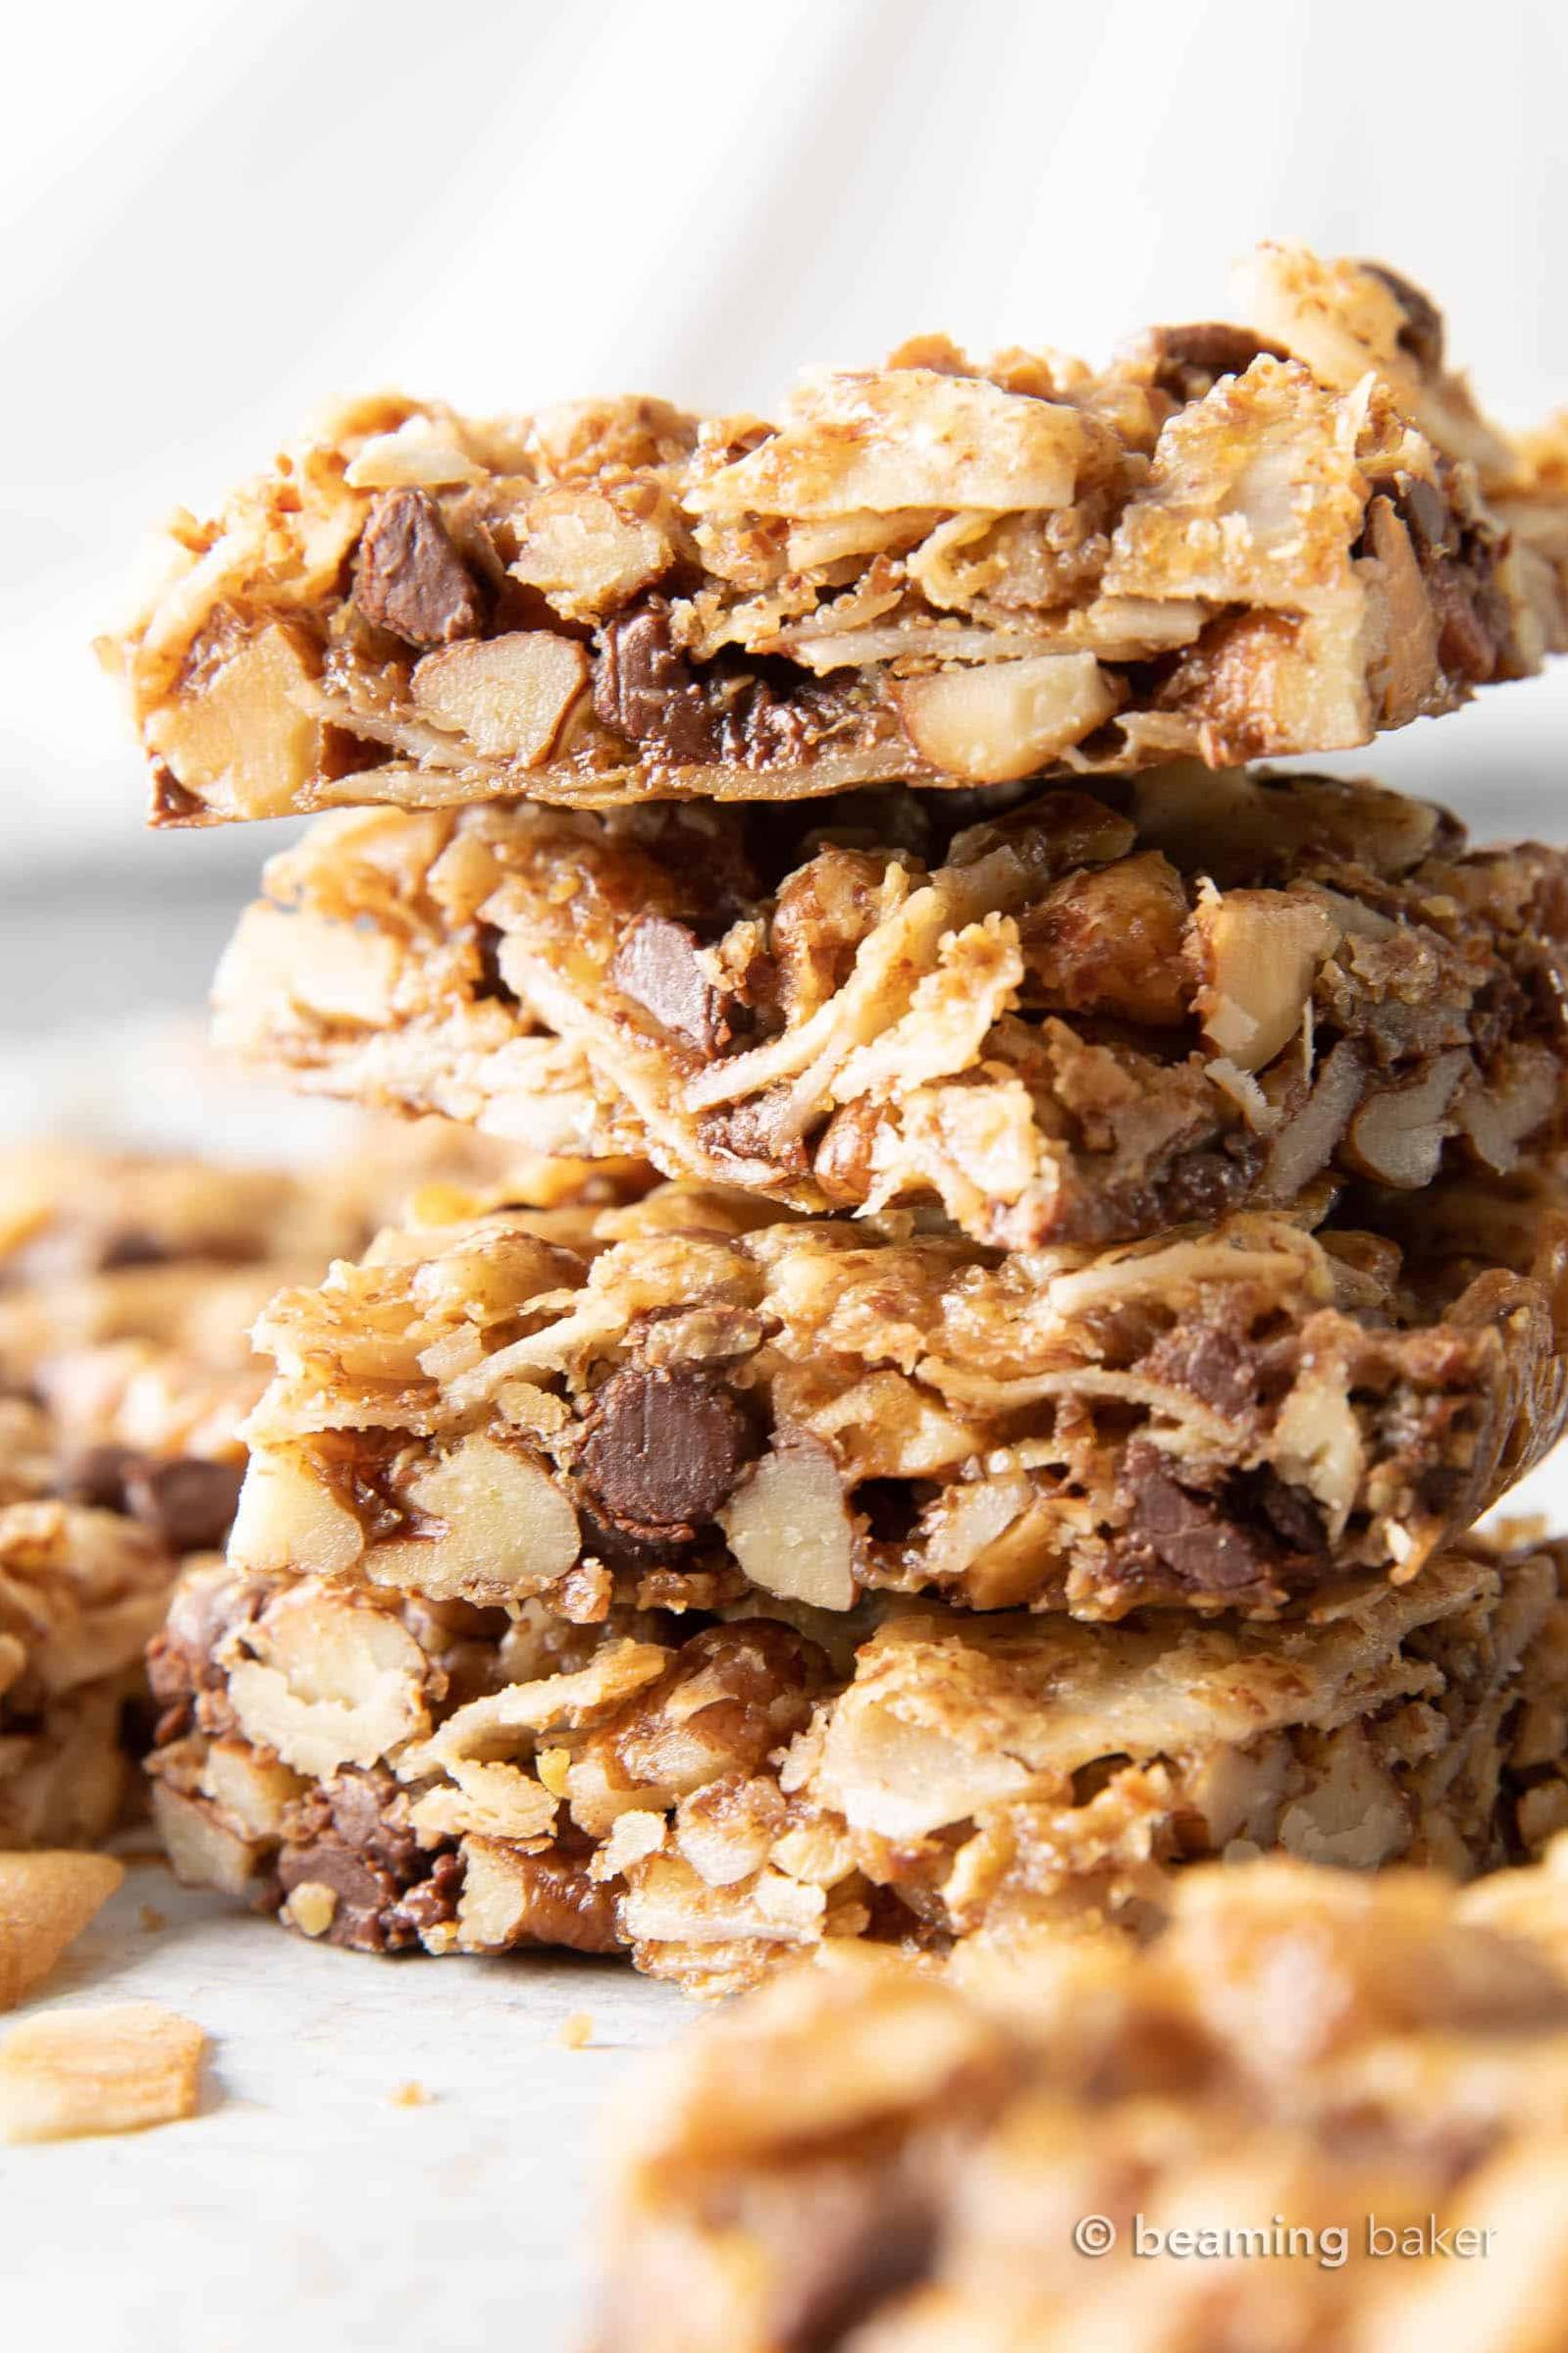  These delicious bars are loaded with a perfect blend of sweet and savory flavors.